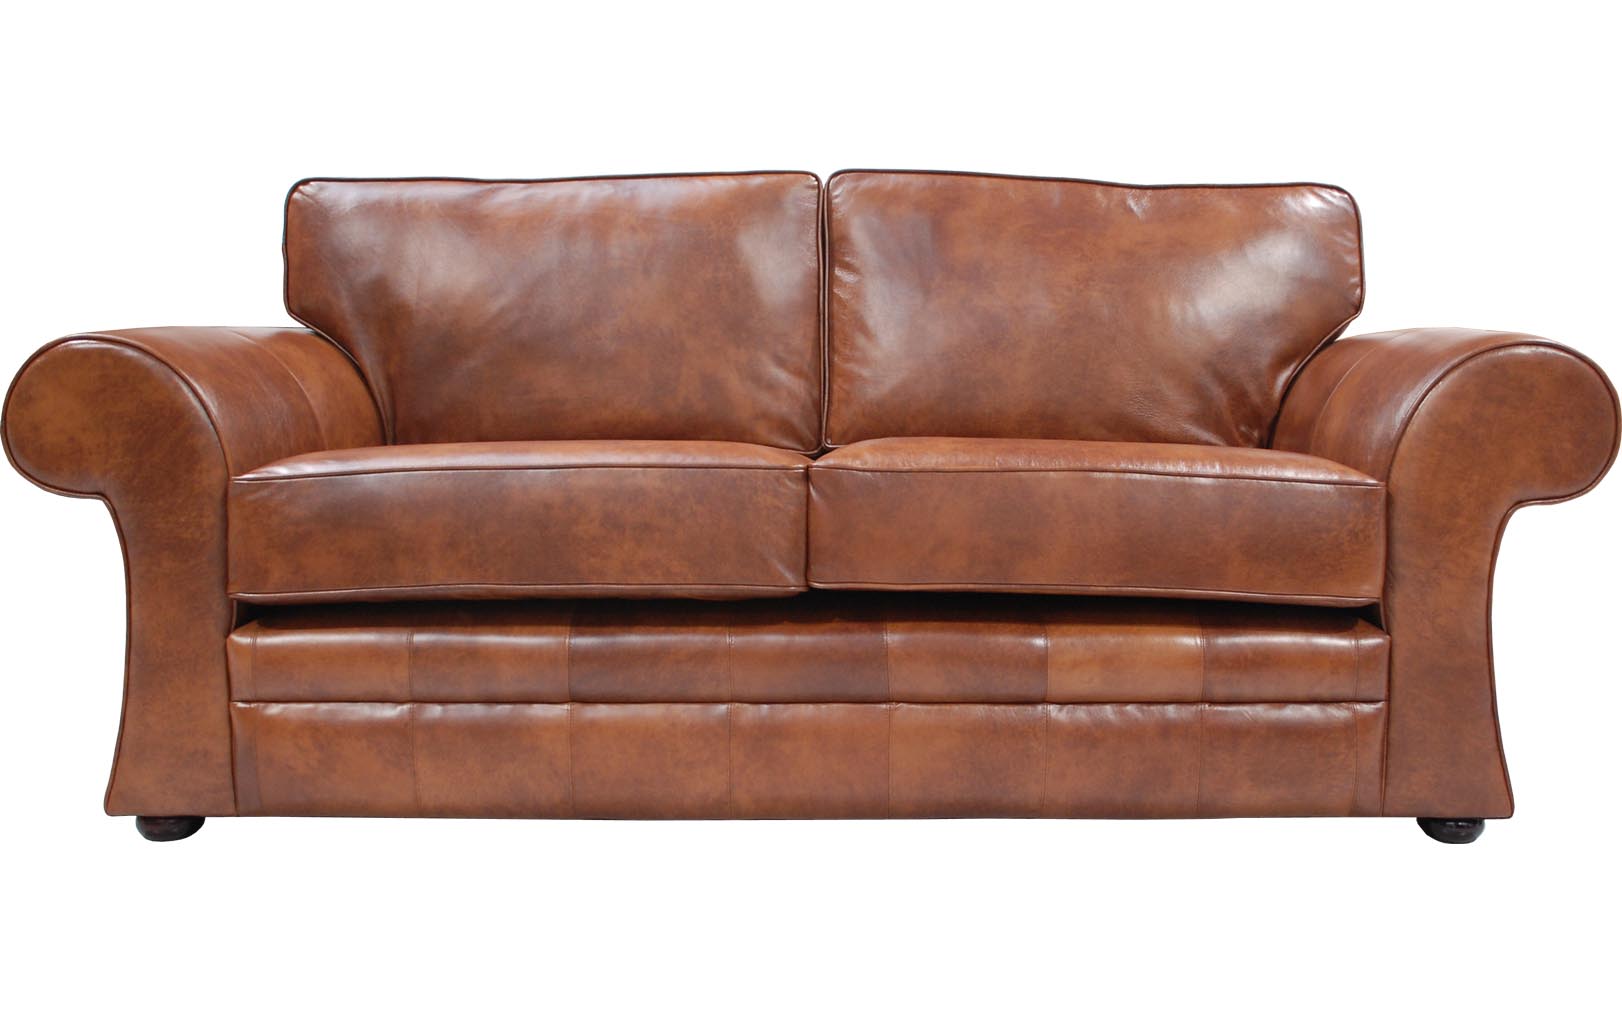 leather sofa bed sale gumtree